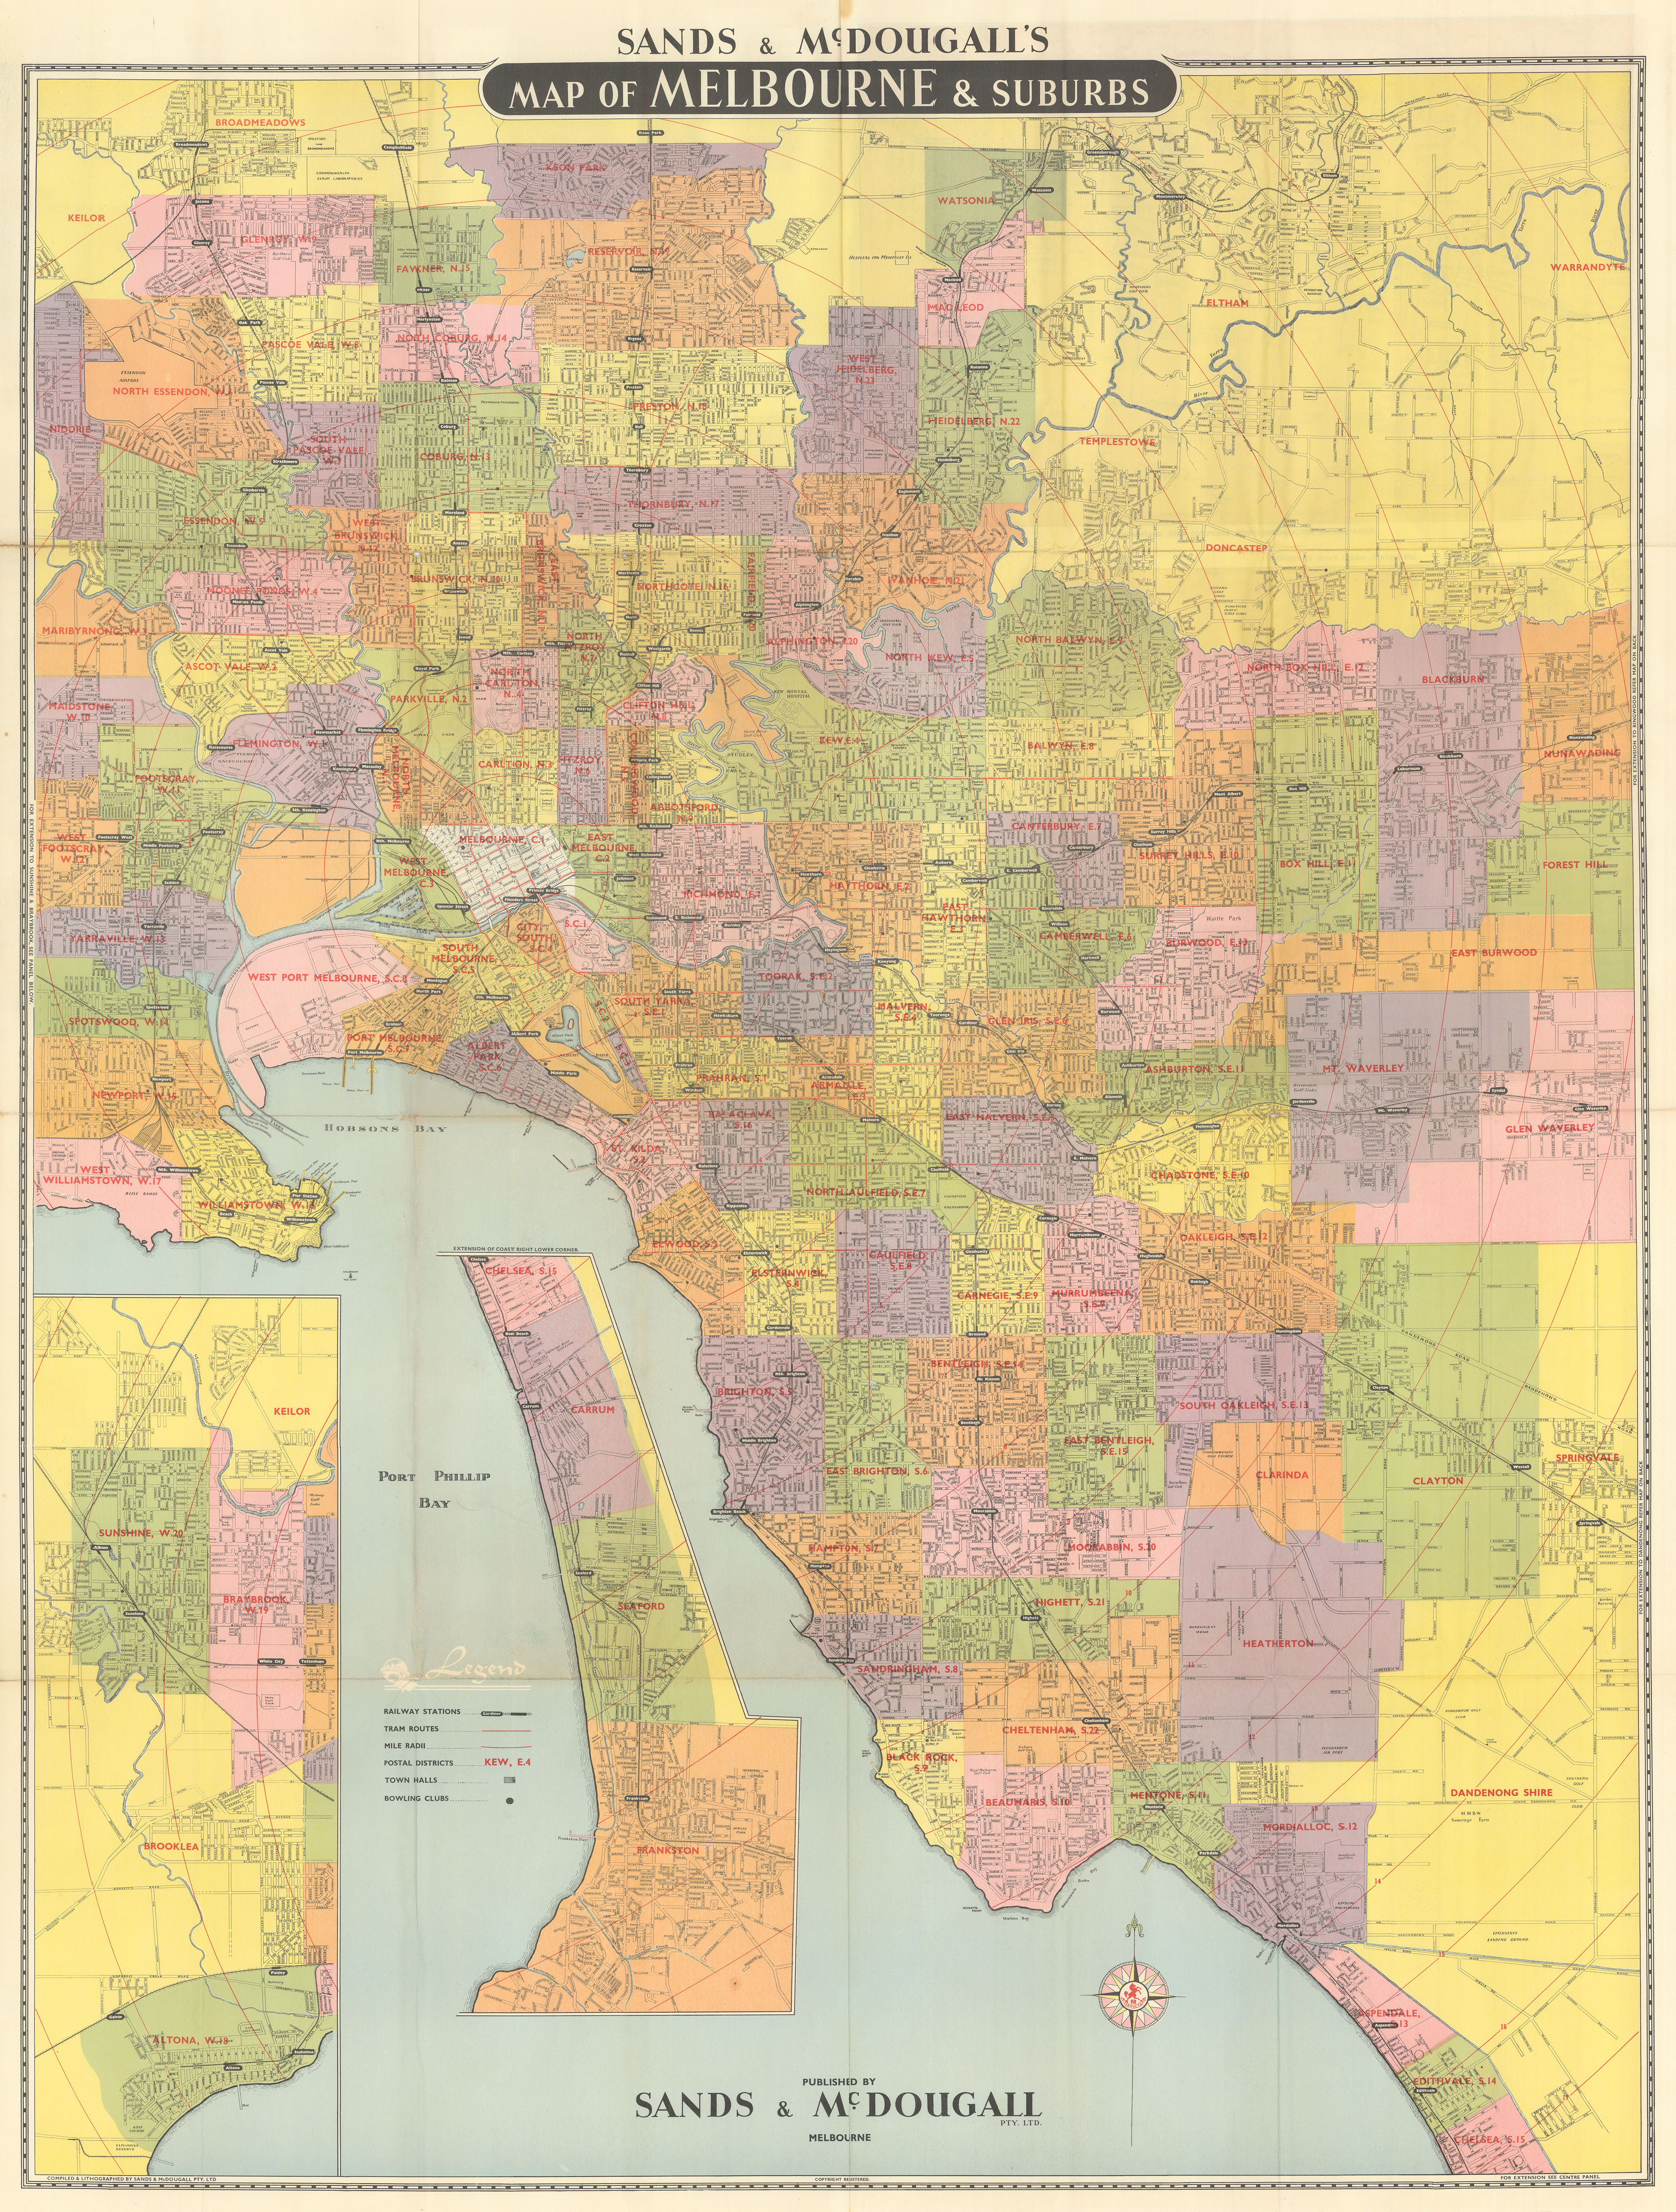 Associate Product Map of Melbourne and Suburbs by Sands & McDougall. 114x86cm 1959 old